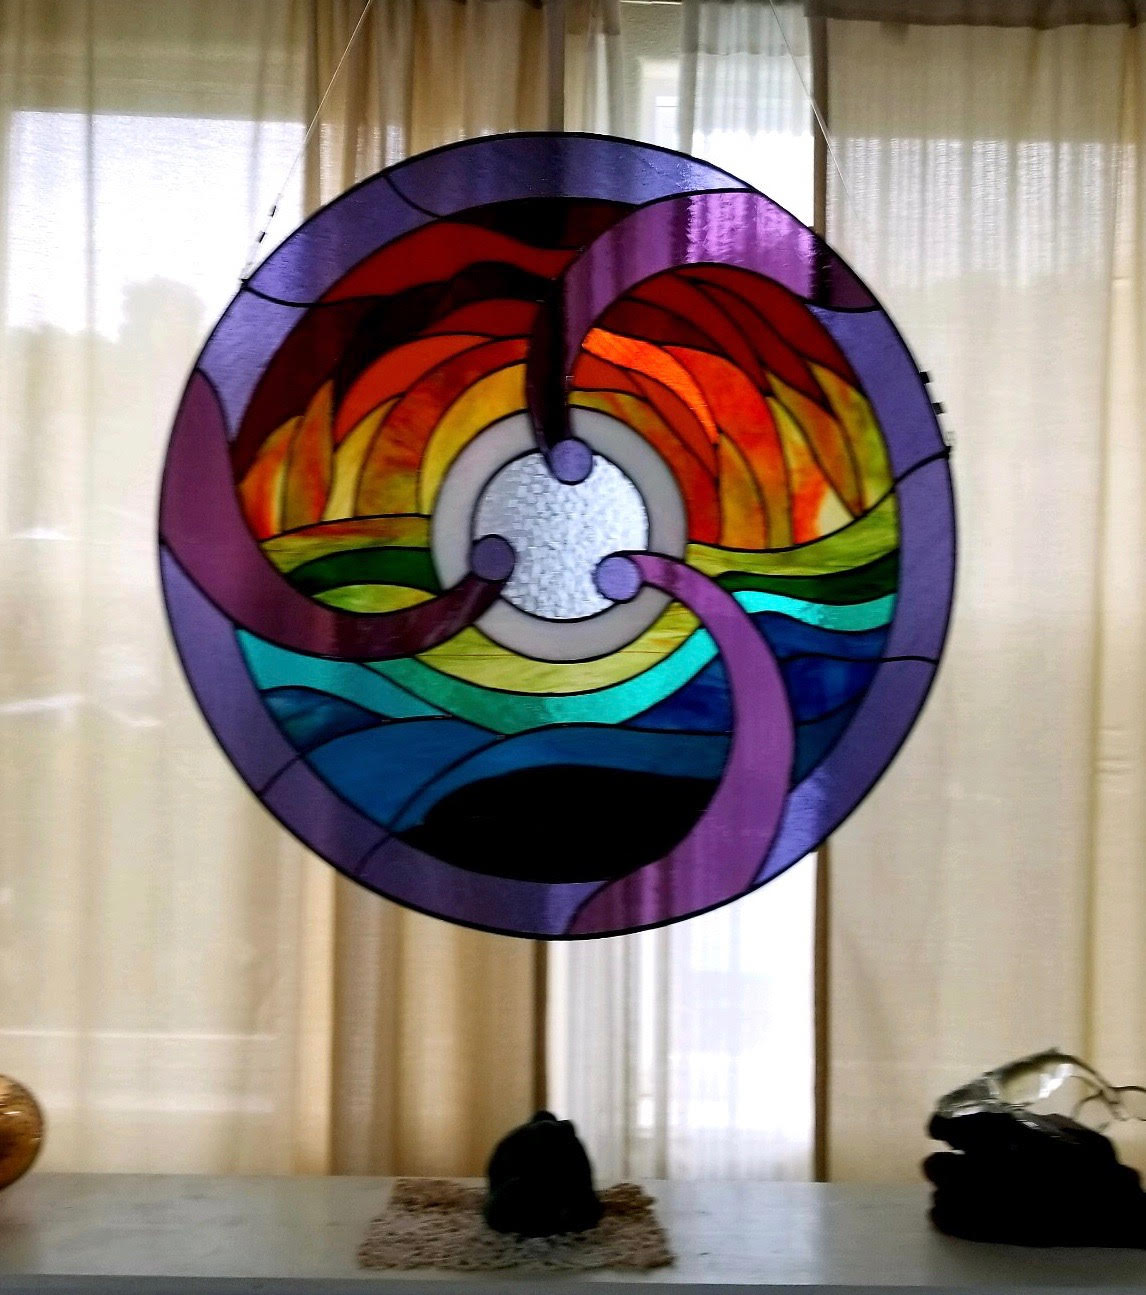 Click here to see Calley's stained glass website for more ideas and information regarding her work.